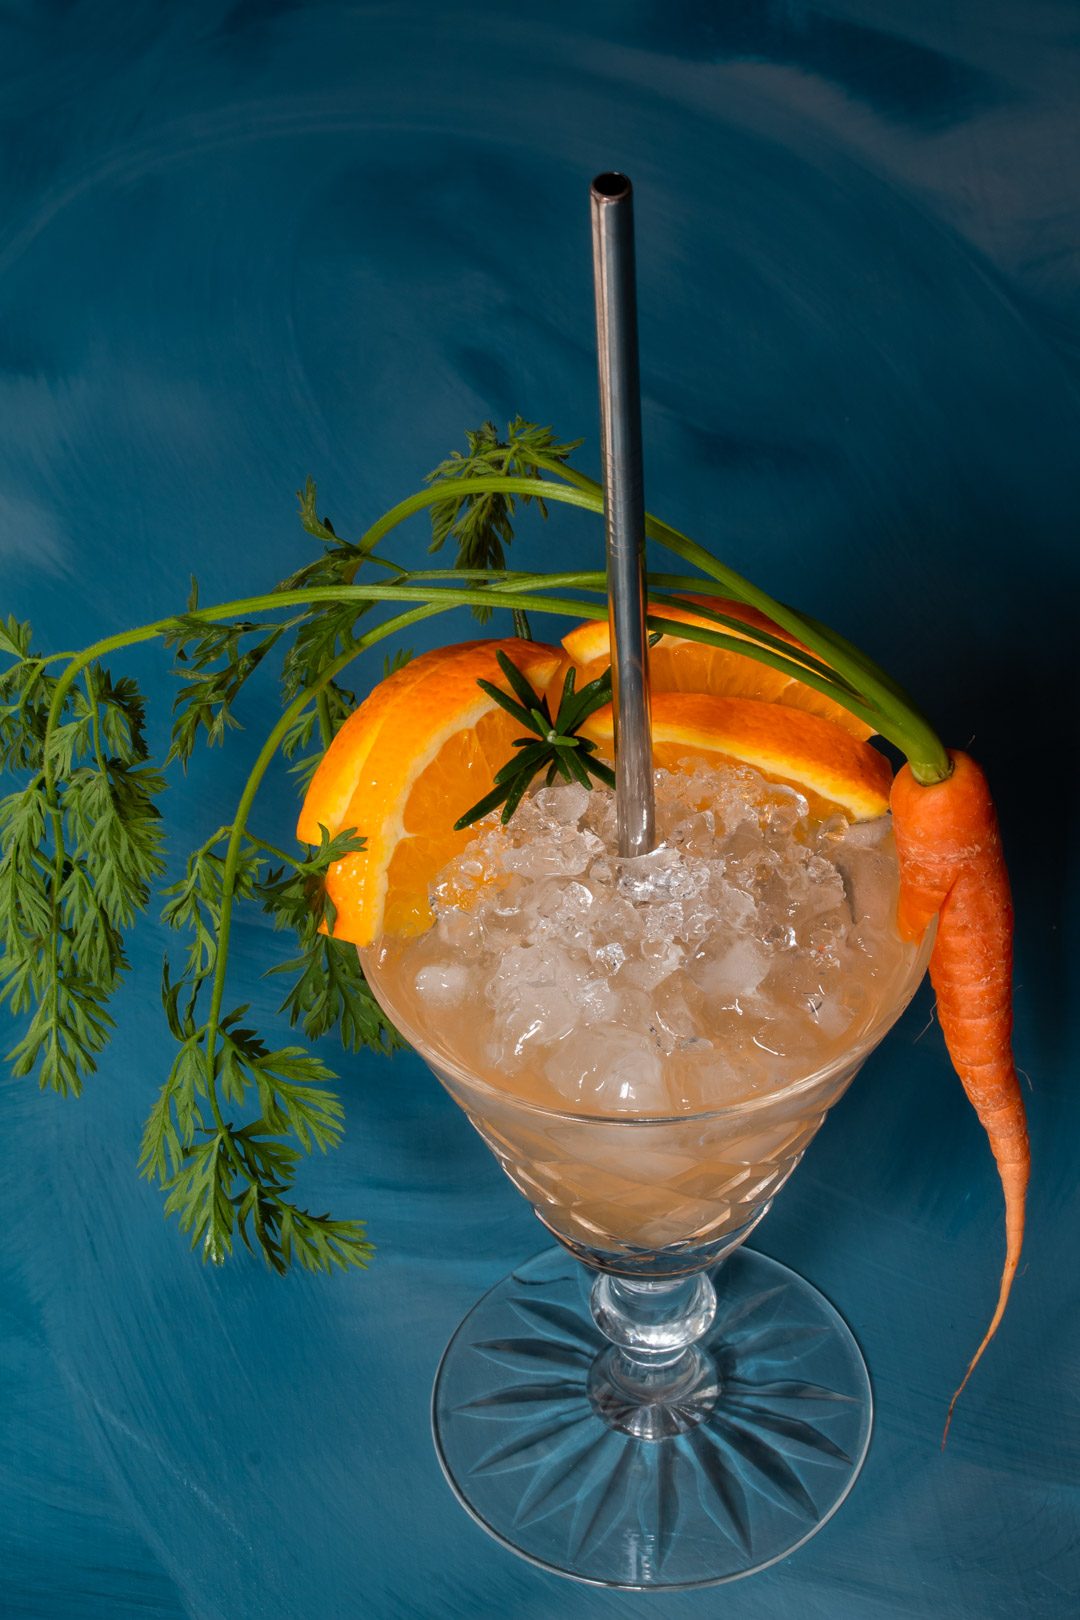 carrot shrub daisy cocktail from 45 degree angle on a blue textured background